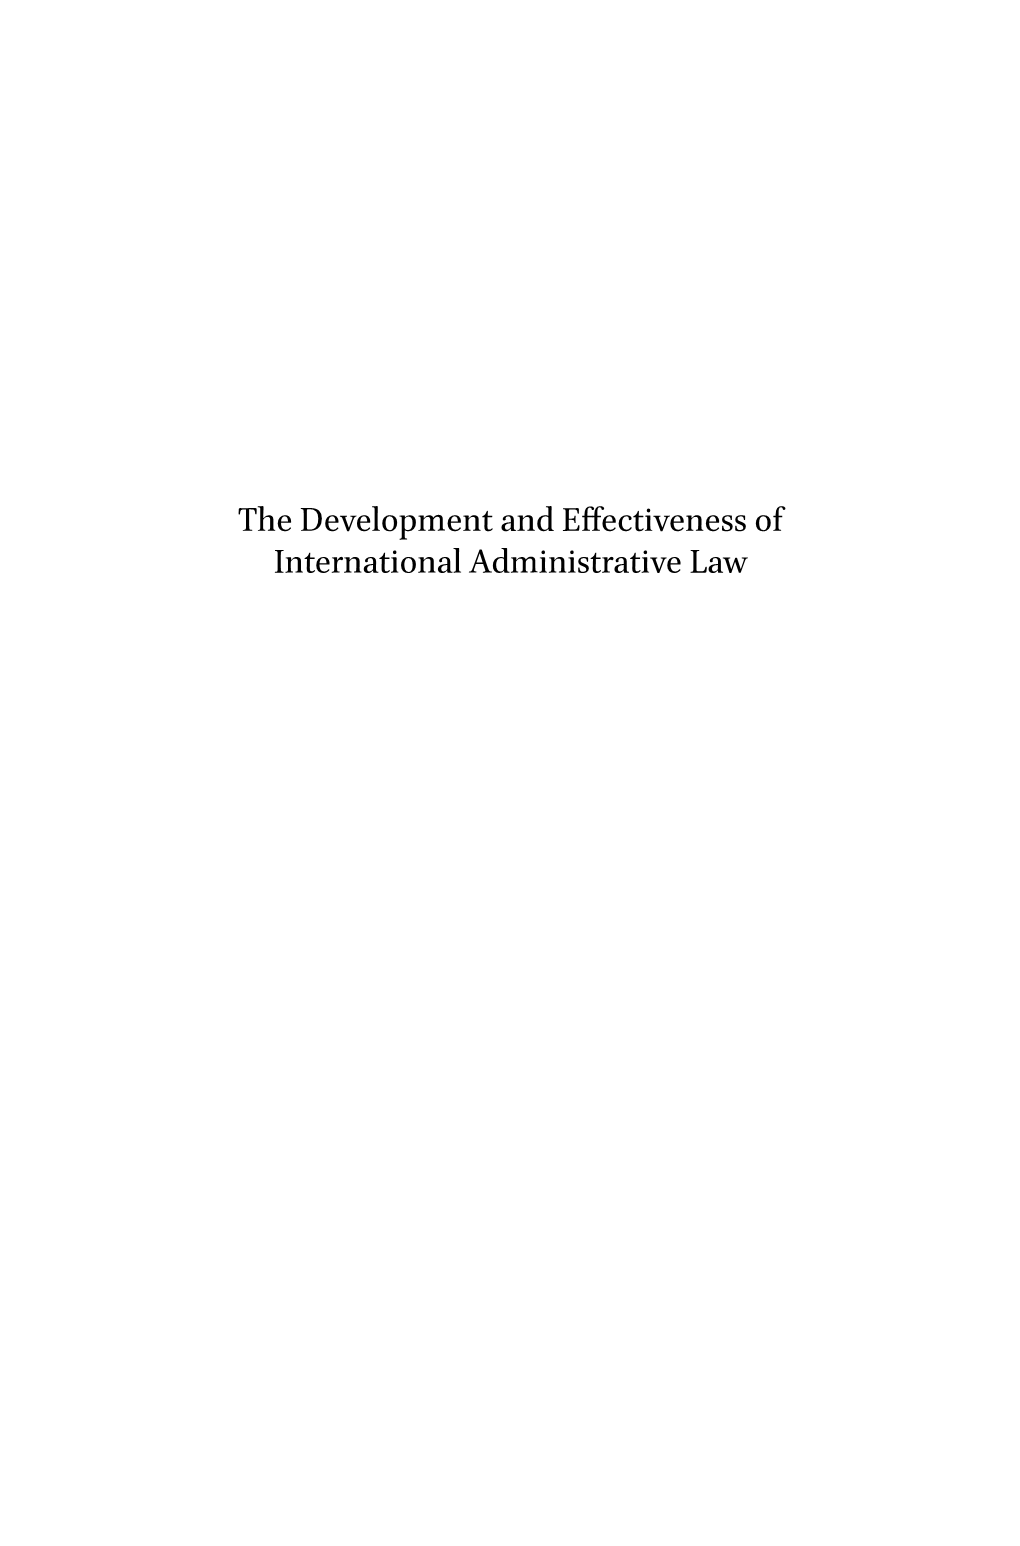 The Development and Efffectiveness of International Administrative Law Queen Mary Studies in International Law